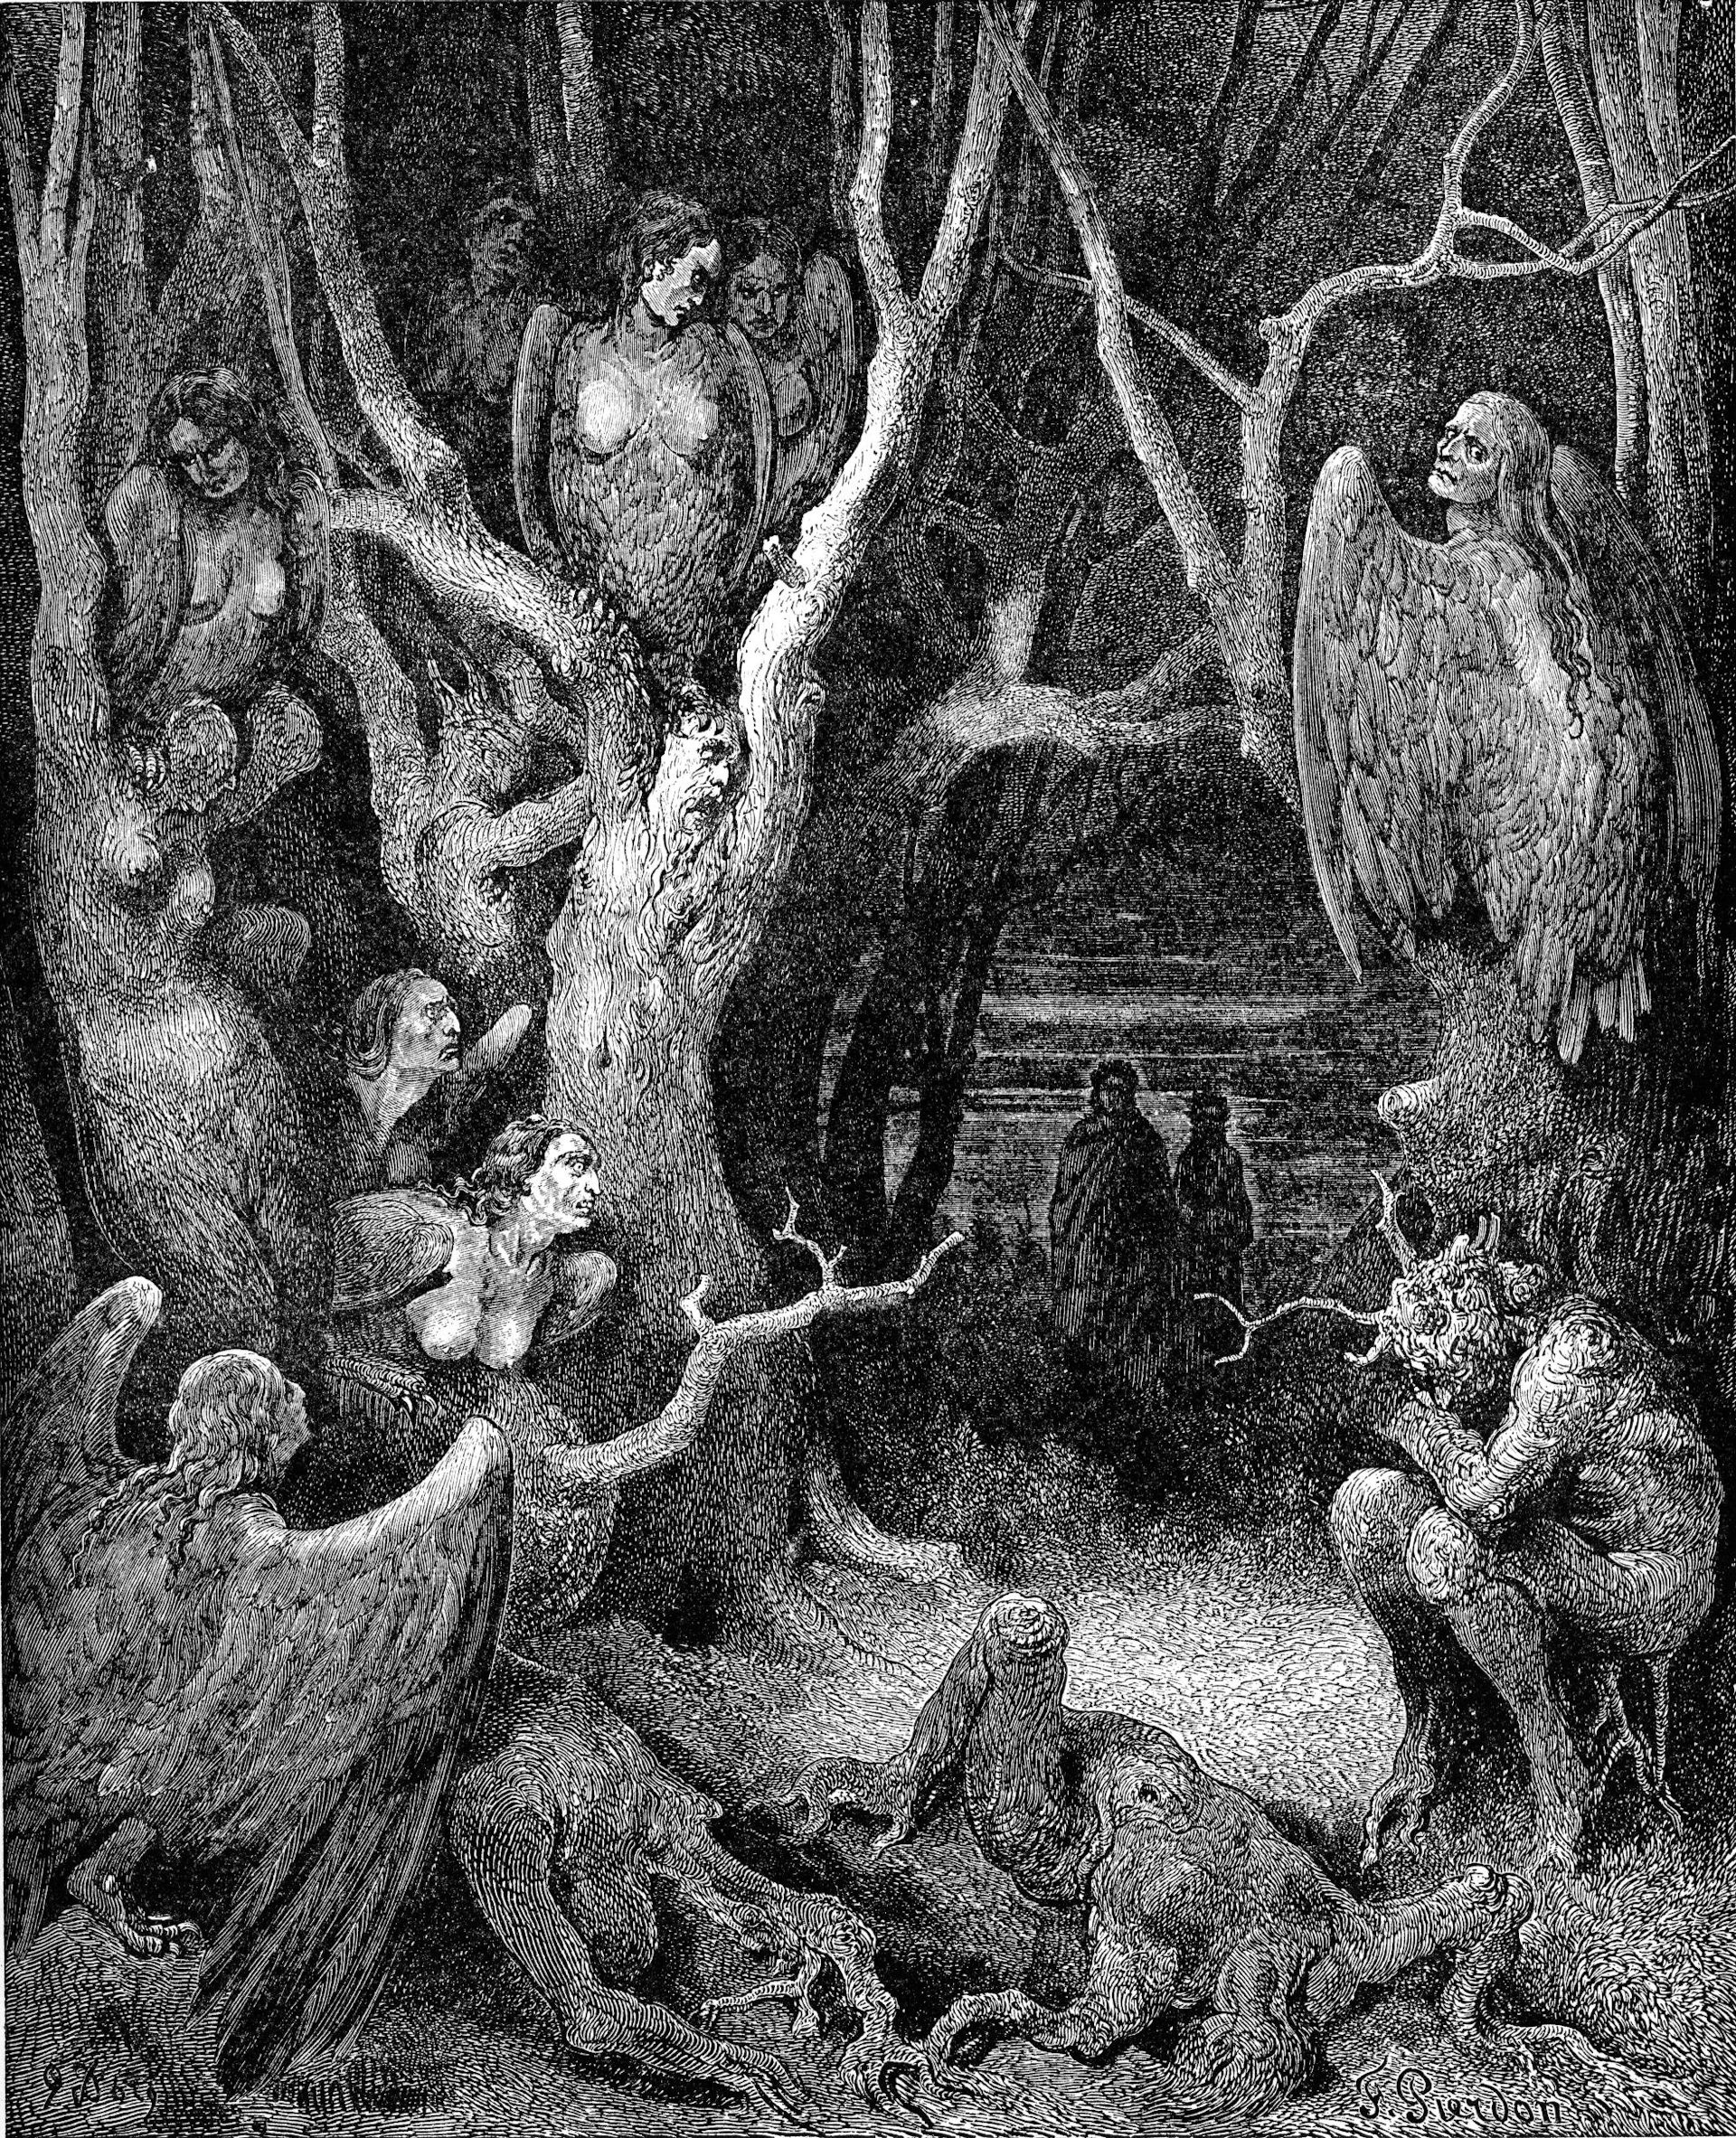 Illustration harpies in forest of suicides from Dante Inferno canto xiii by Gustave Doré, 19th century